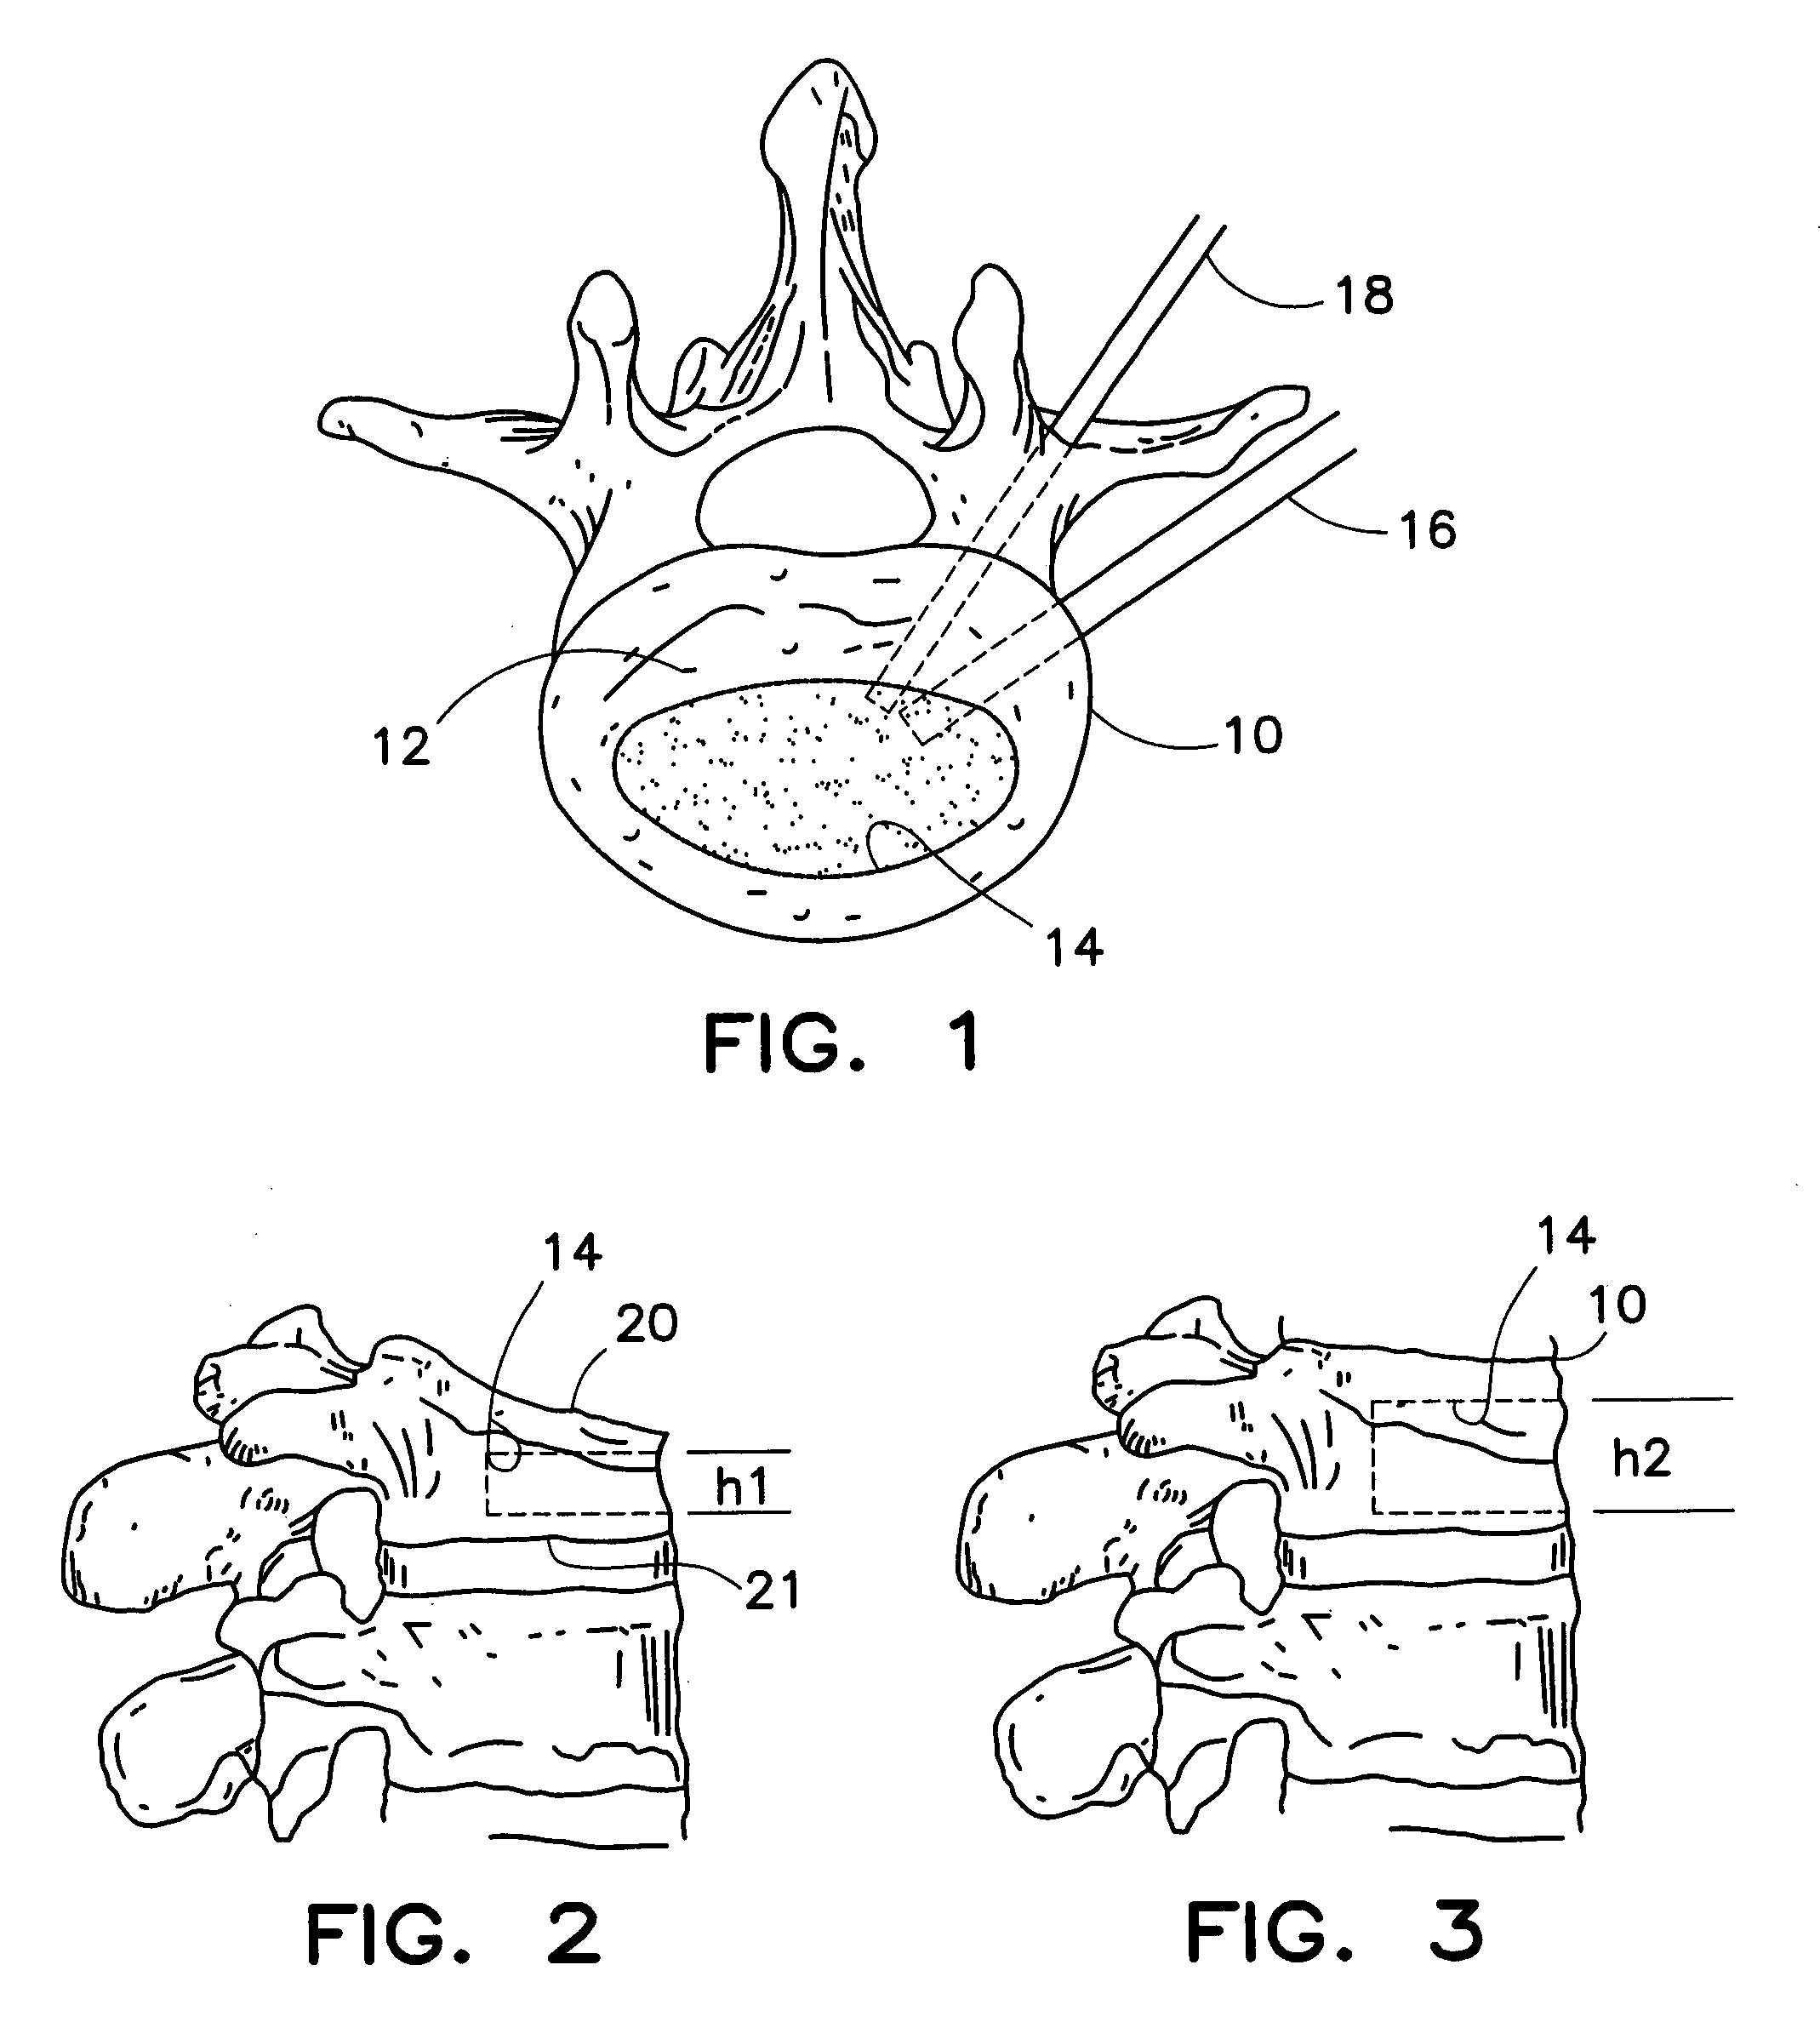 Method and apparatus for treating a vertebral body